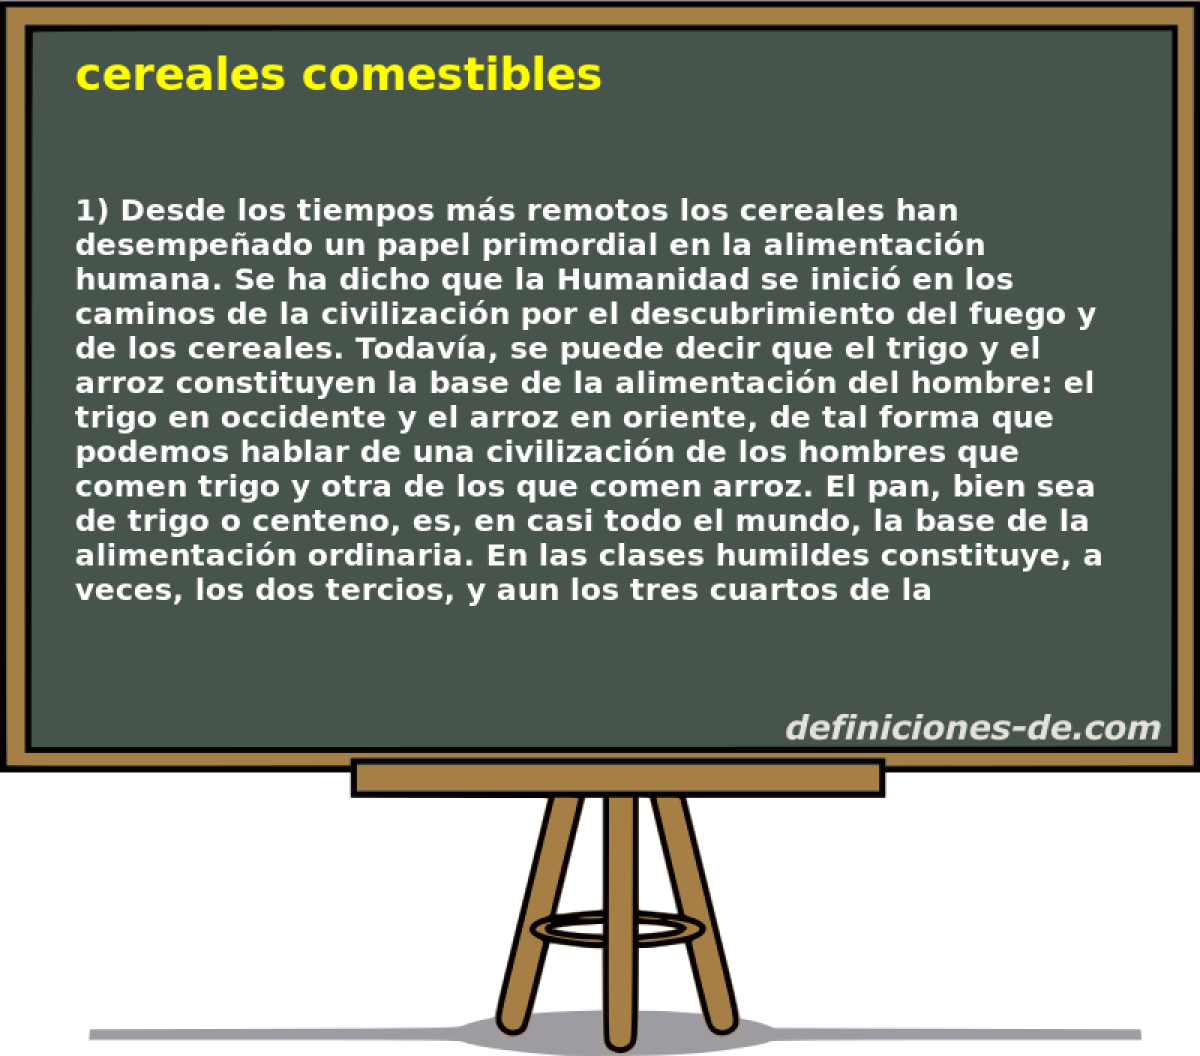 cereales comestibles 